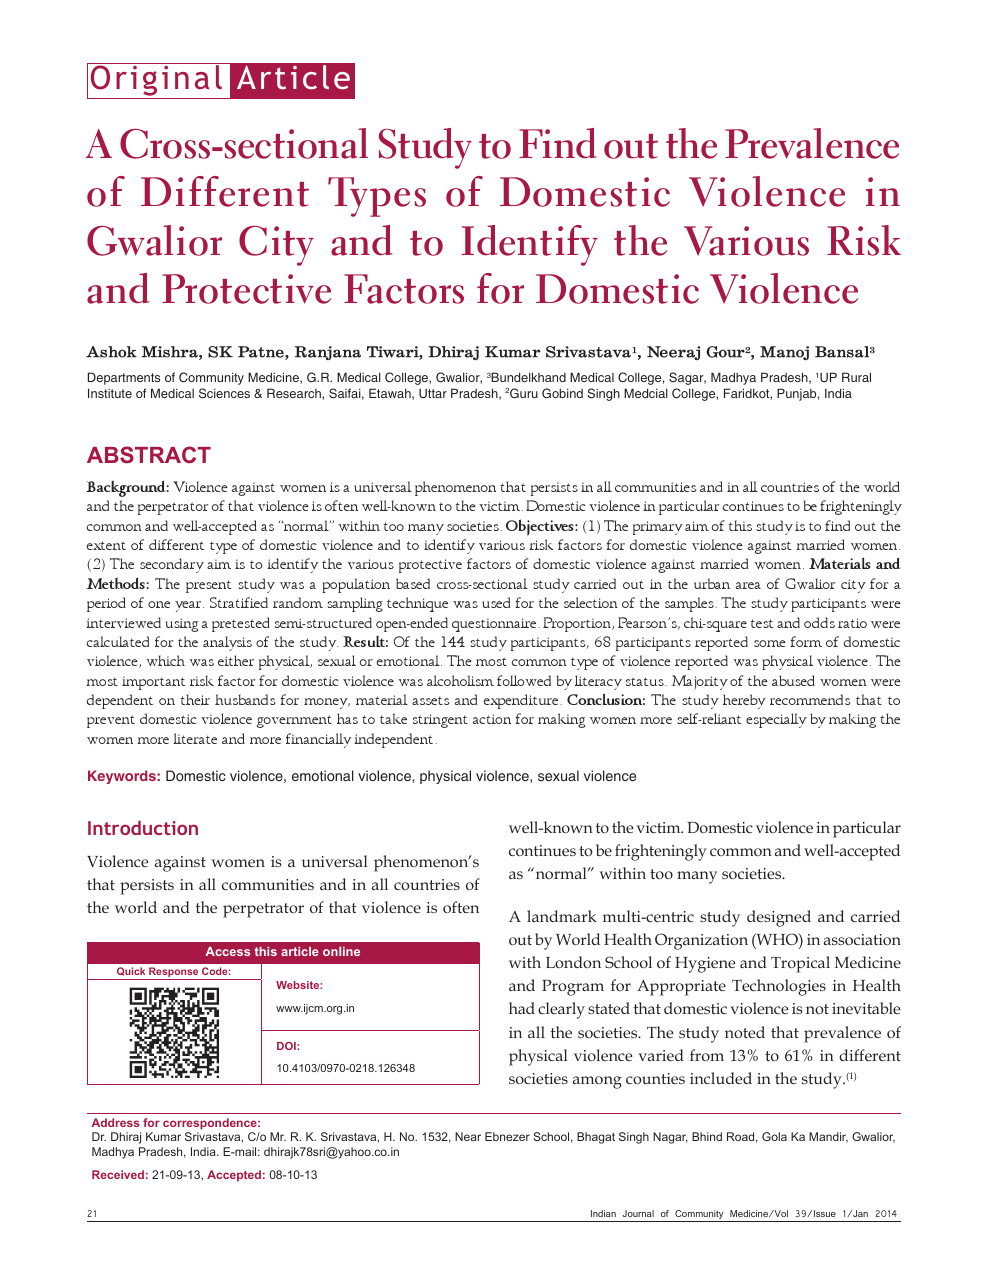 research paper topics on domestic violence